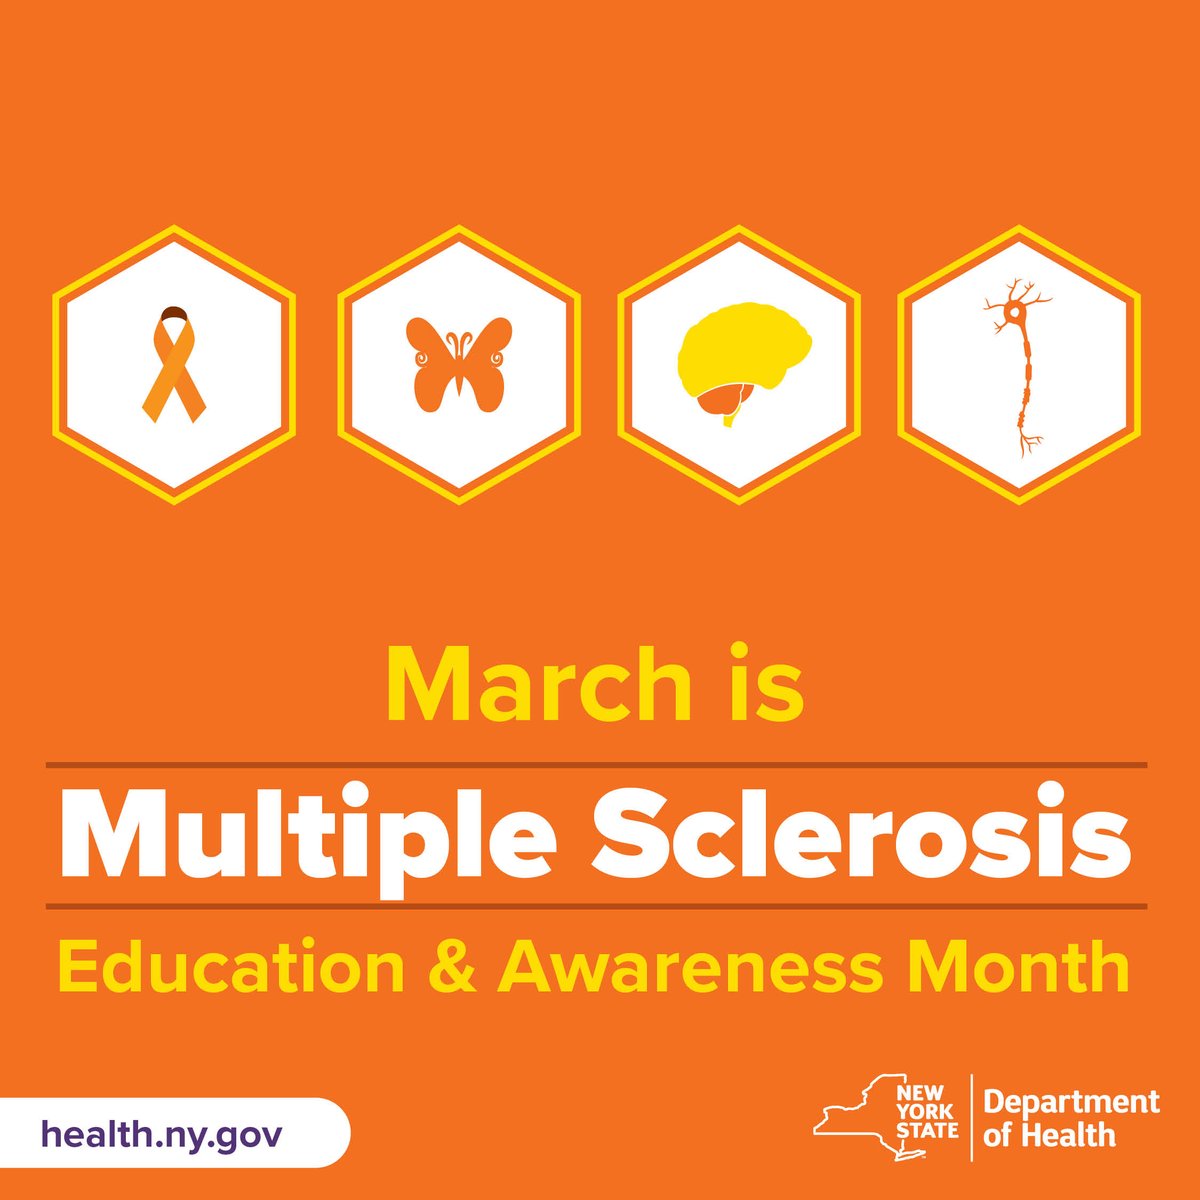 I encourage all New Yorkers to learn more about this very challenging and unpredictable autoimmune condition that affects the central nervous system. You can find a link to the National Multiple Sclerosis Society and learn more about MS here: health.ny.gov/press/releases…